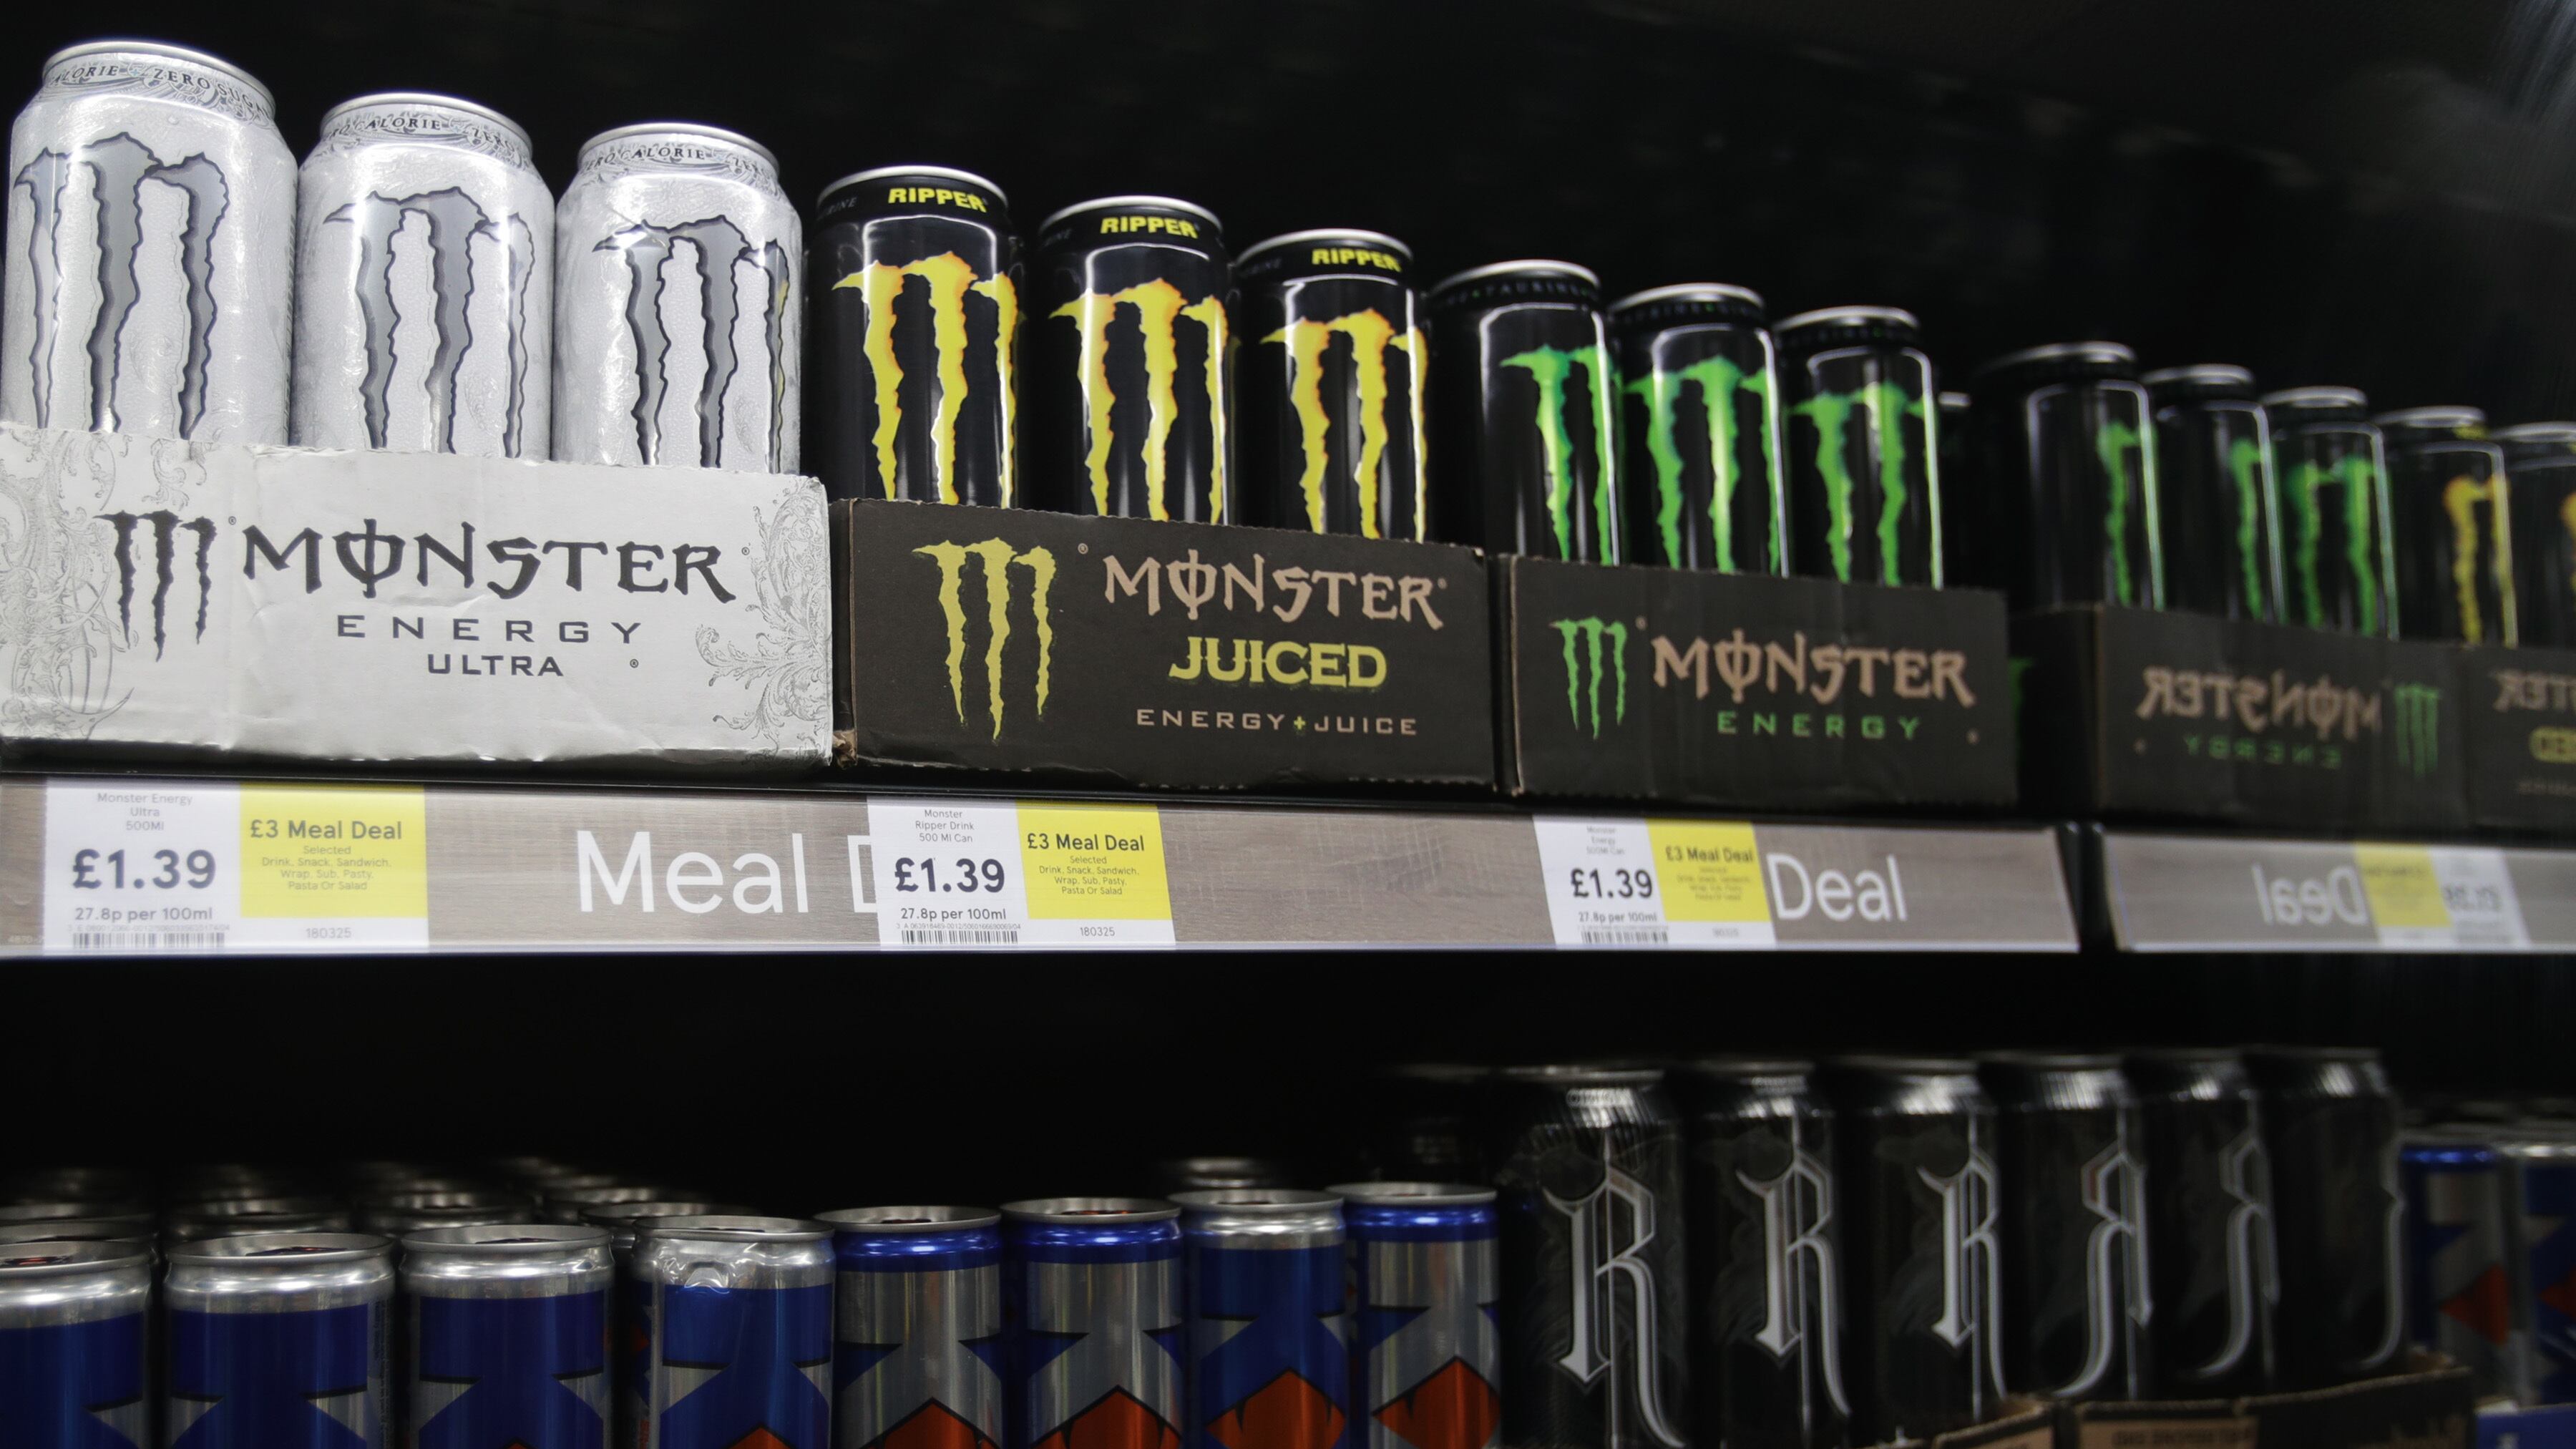 Doctors advised caution as energy drinks may trigger life-threatening conditions in patients with genetic heart diseases